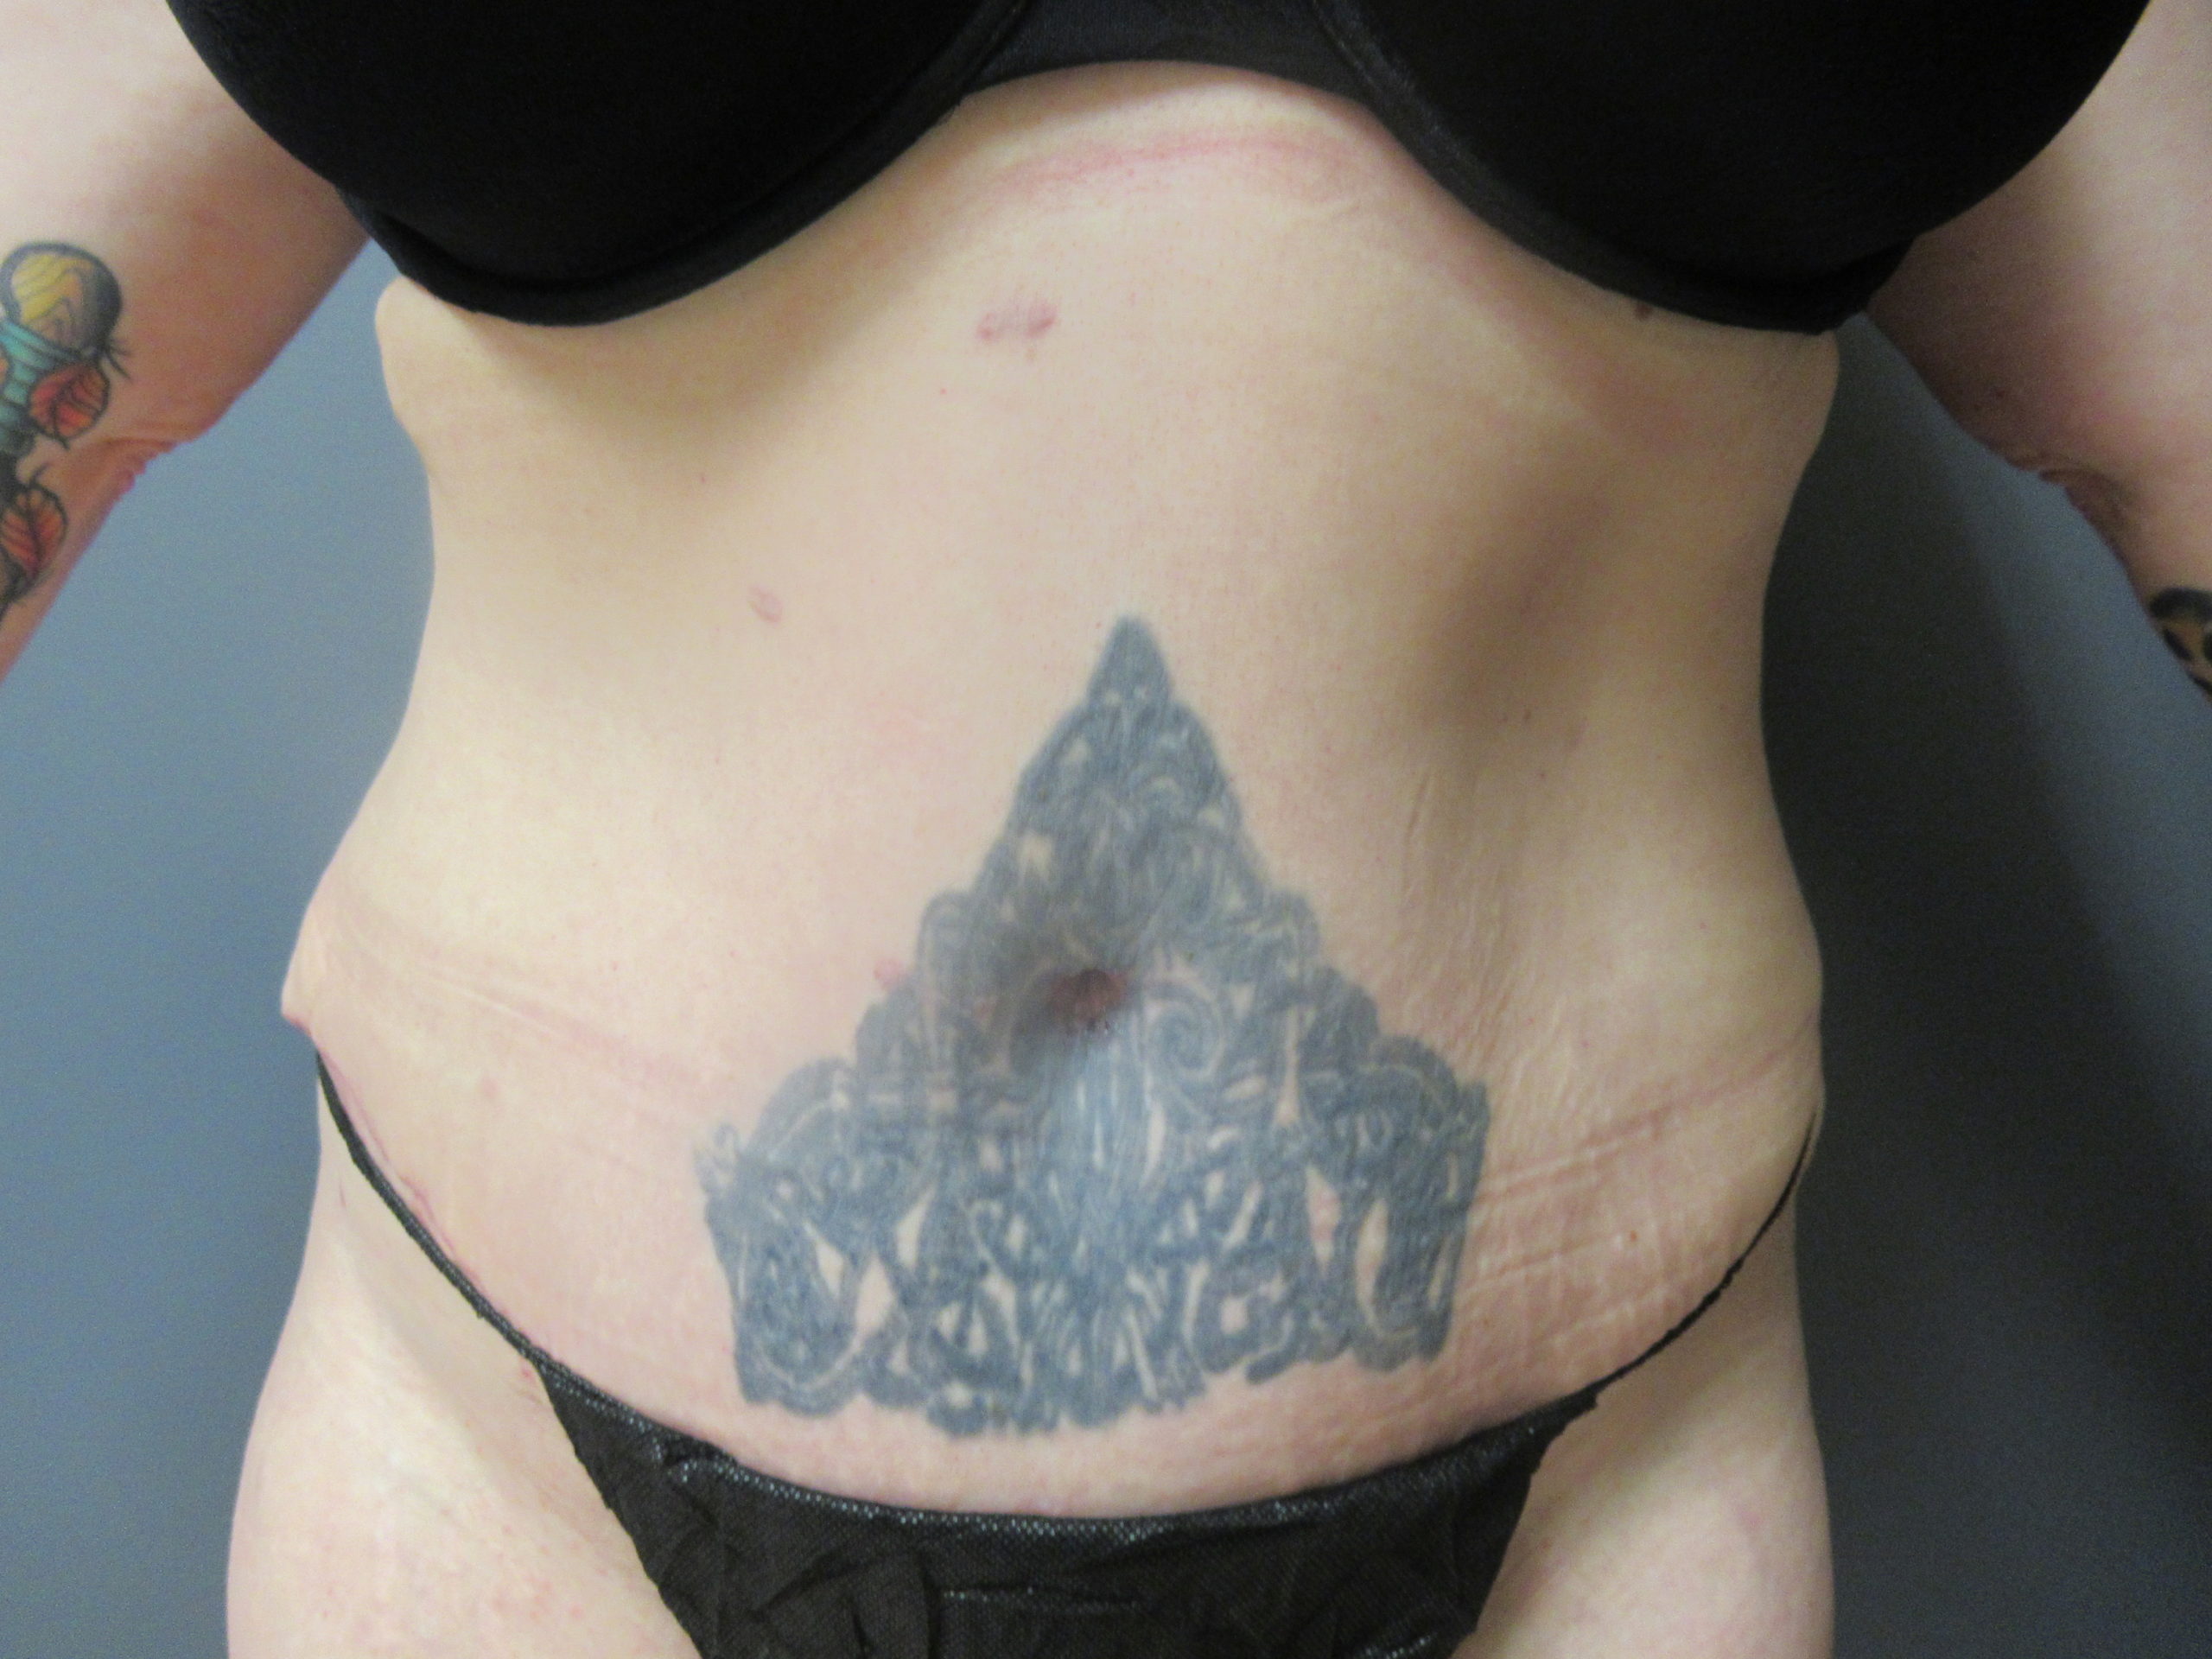 after tummy tuck